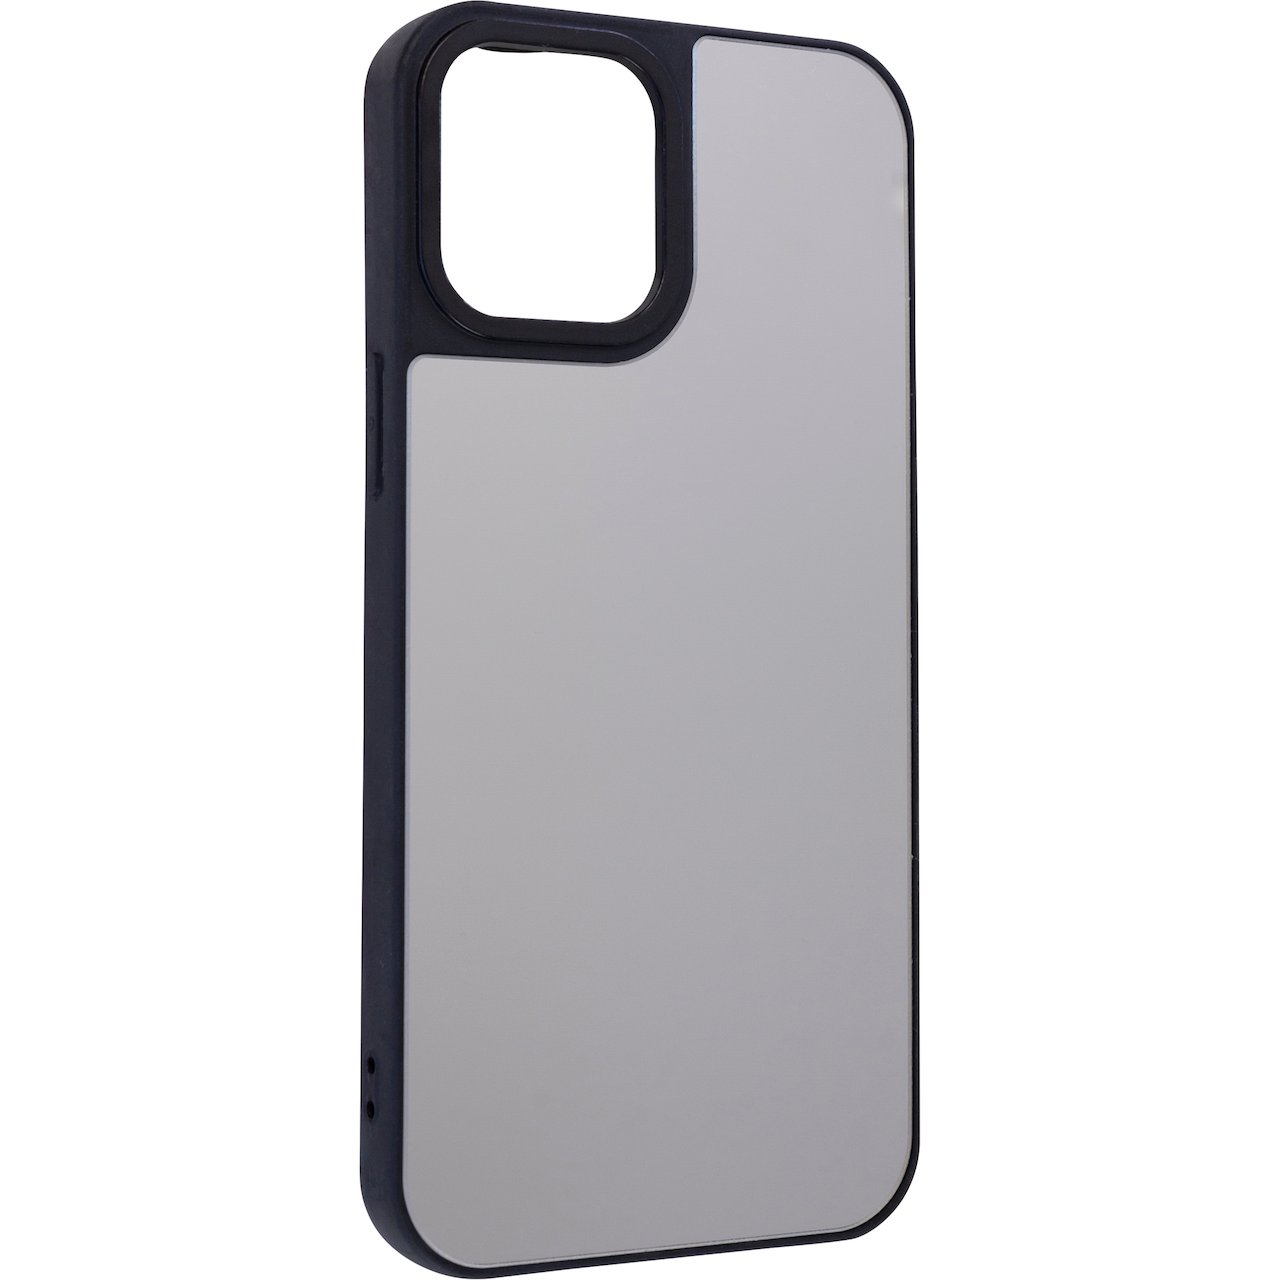 LEKI BYCPH COVER TIL IPHONE 12 PRO MAX MIRROR SILVER